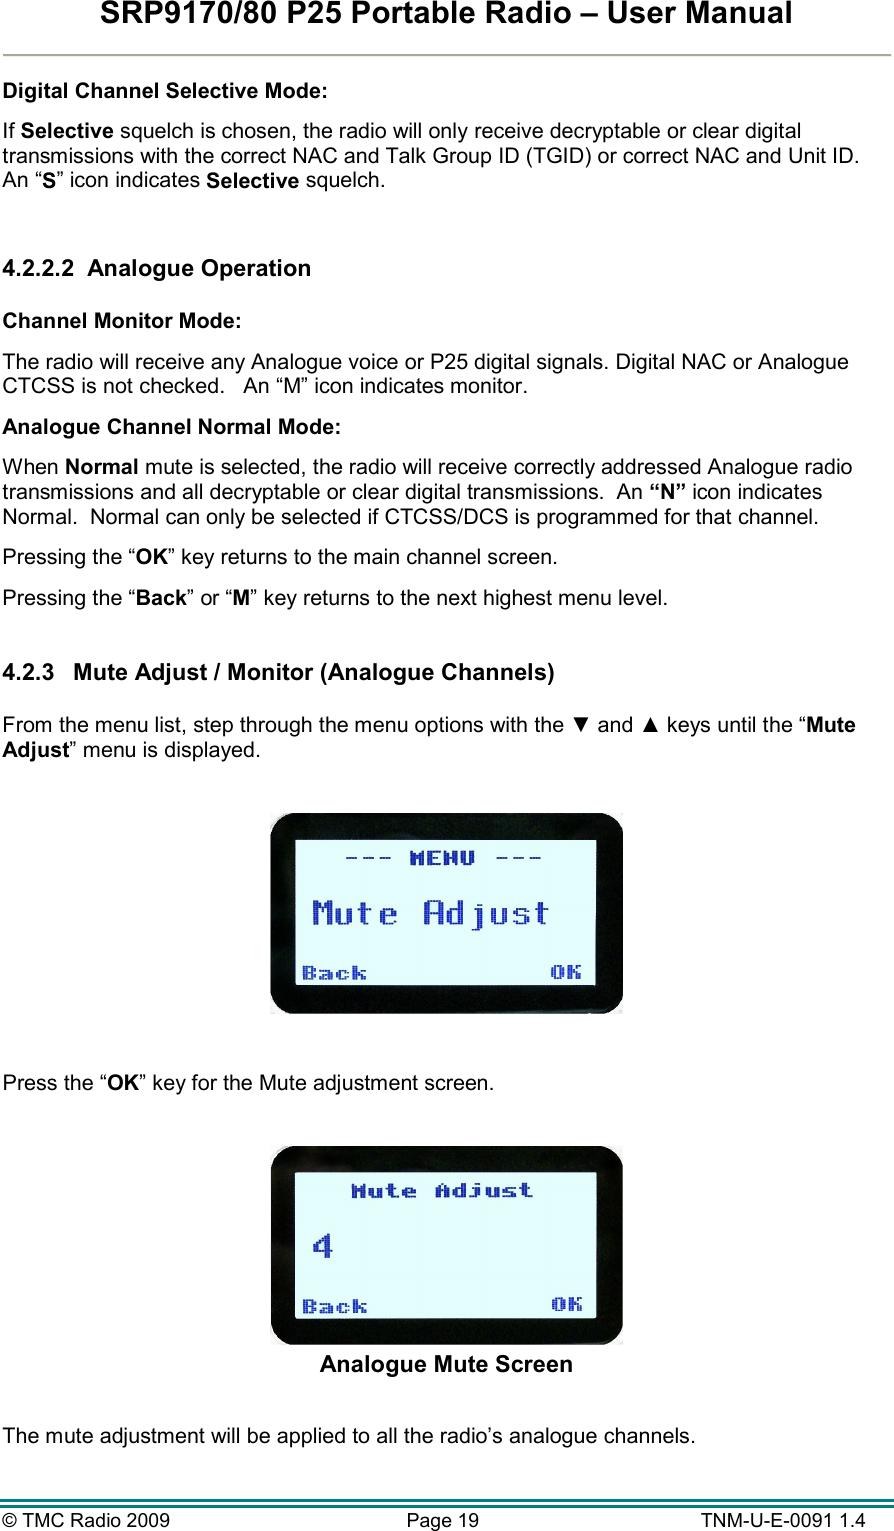 SRP9170/80 P25 Portable Radio – User Manual  © TMC Radio 2009  Page 19   TNM-U-E-0091 1.4 Digital Channel Selective Mode: If Selective squelch is chosen, the radio will only receive decryptable or clear digital transmissions with the correct NAC and Talk Group ID (TGID) or correct NAC and Unit ID.   An “S” icon indicates Selective squelch.  4.2.2.2  Analogue Operation  Channel Monitor Mode:   The radio will receive any Analogue voice or P25 digital signals. Digital NAC or Analogue CTCSS is not checked.   An “M” icon indicates monitor. Analogue Channel Normal Mode: When Normal mute is selected, the radio will receive correctly addressed Analogue radio transmissions and all decryptable or clear digital transmissions.  An “N” icon indicates Normal.  Normal can only be selected if CTCSS/DCS is programmed for that channel. Pressing the “OK” key returns to the main channel screen.   Pressing the “Back” or “M” key returns to the next highest menu level.  4.2.3  Mute Adjust / Monitor (Analogue Channels)  From the menu list, step through the menu options with the ▼ and ▲ keys until the “Mute Adjust” menu is displayed.    Press the “OK” key for the Mute adjustment screen.   Analogue Mute Screen  The mute adjustment will be applied to all the radio’s analogue channels. 